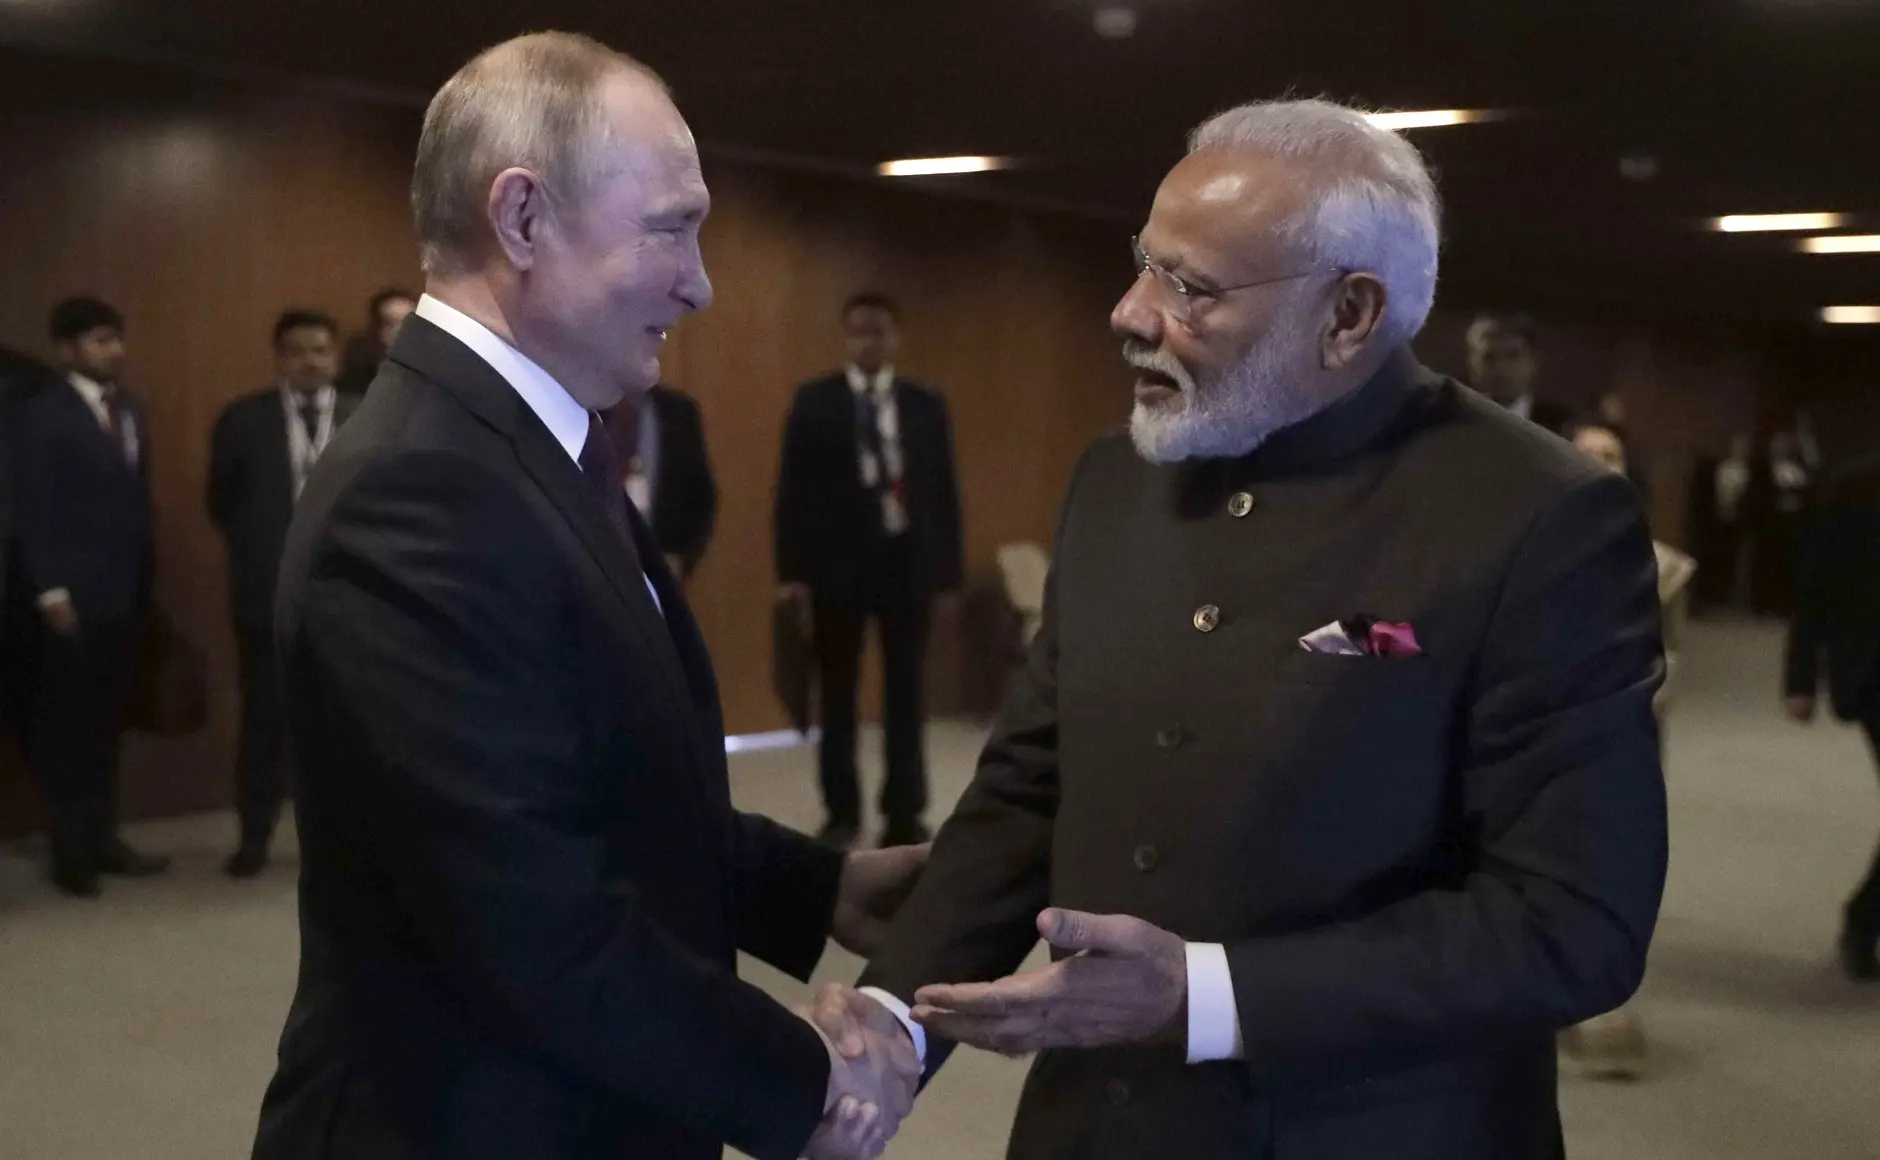 India-Russia ties go deeper with provinces getting into the act